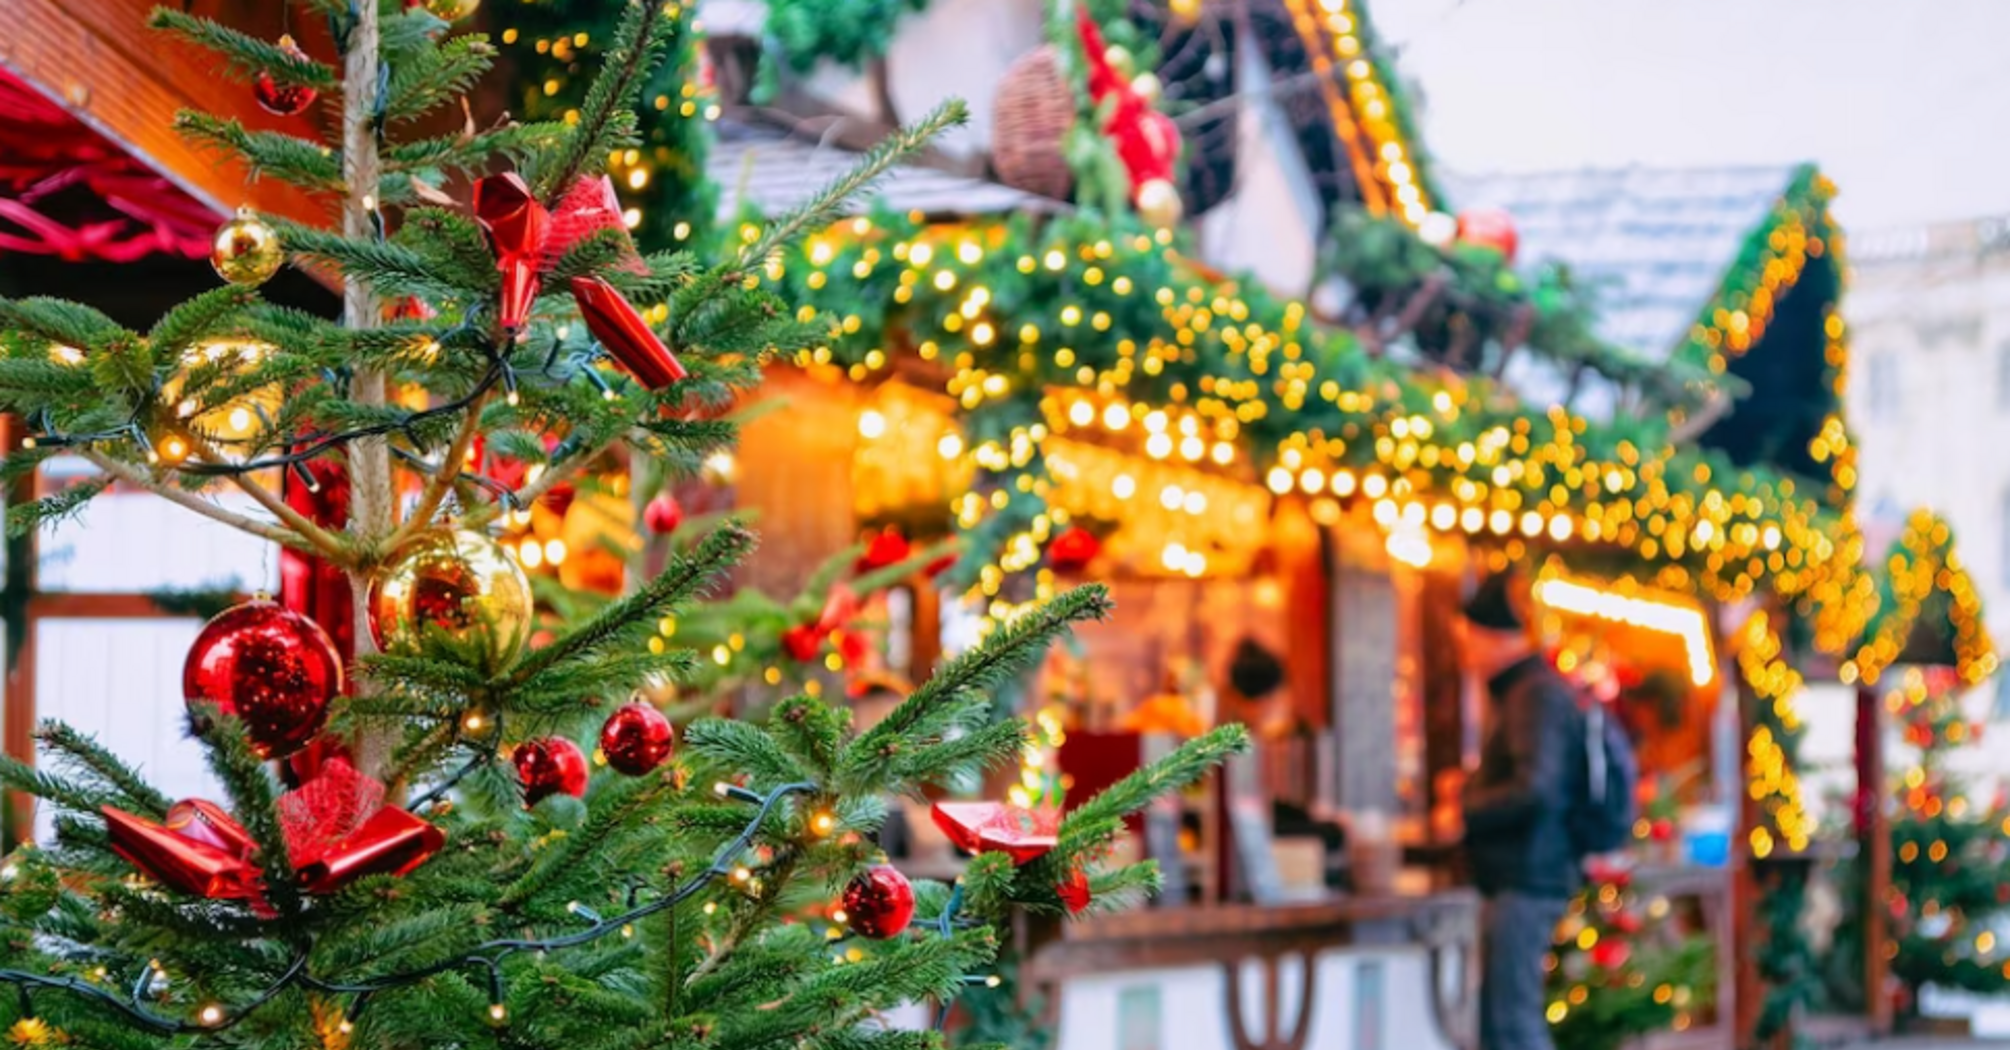 Top 5 most interesting Christmas markets in Berlin